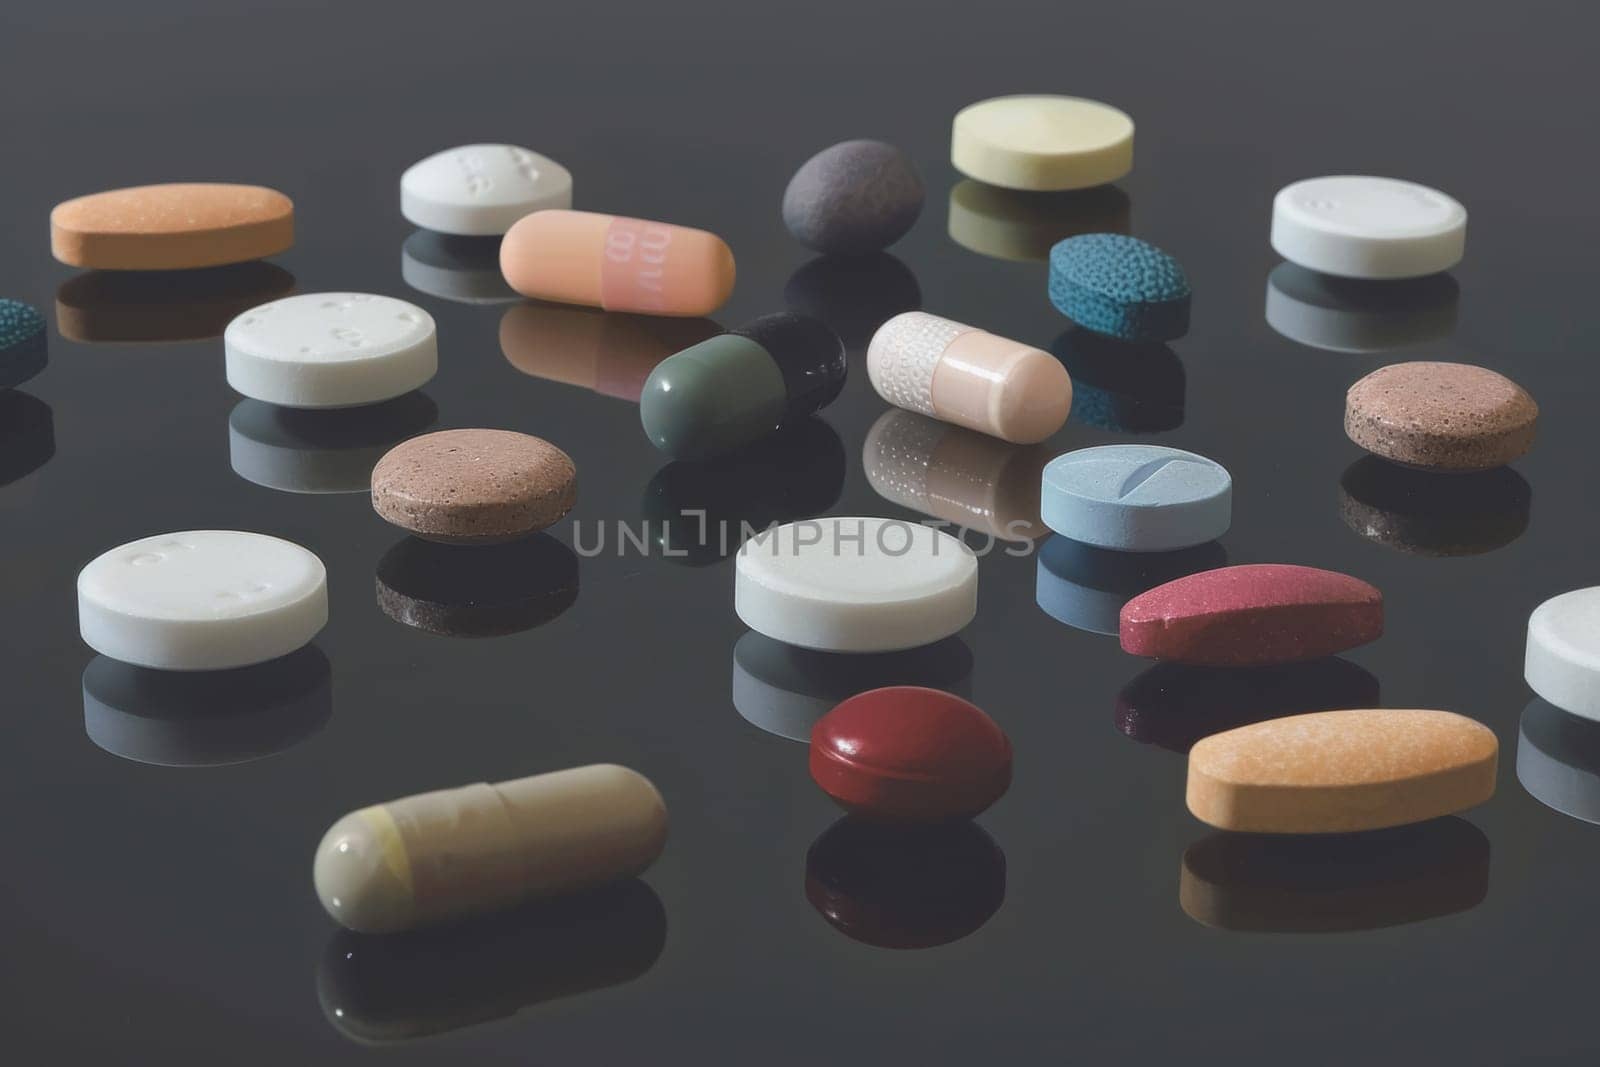 A close-up view of various pills, each with a distinct color and texture, arranged in a precise gradient, reflecting meticulous care and organization